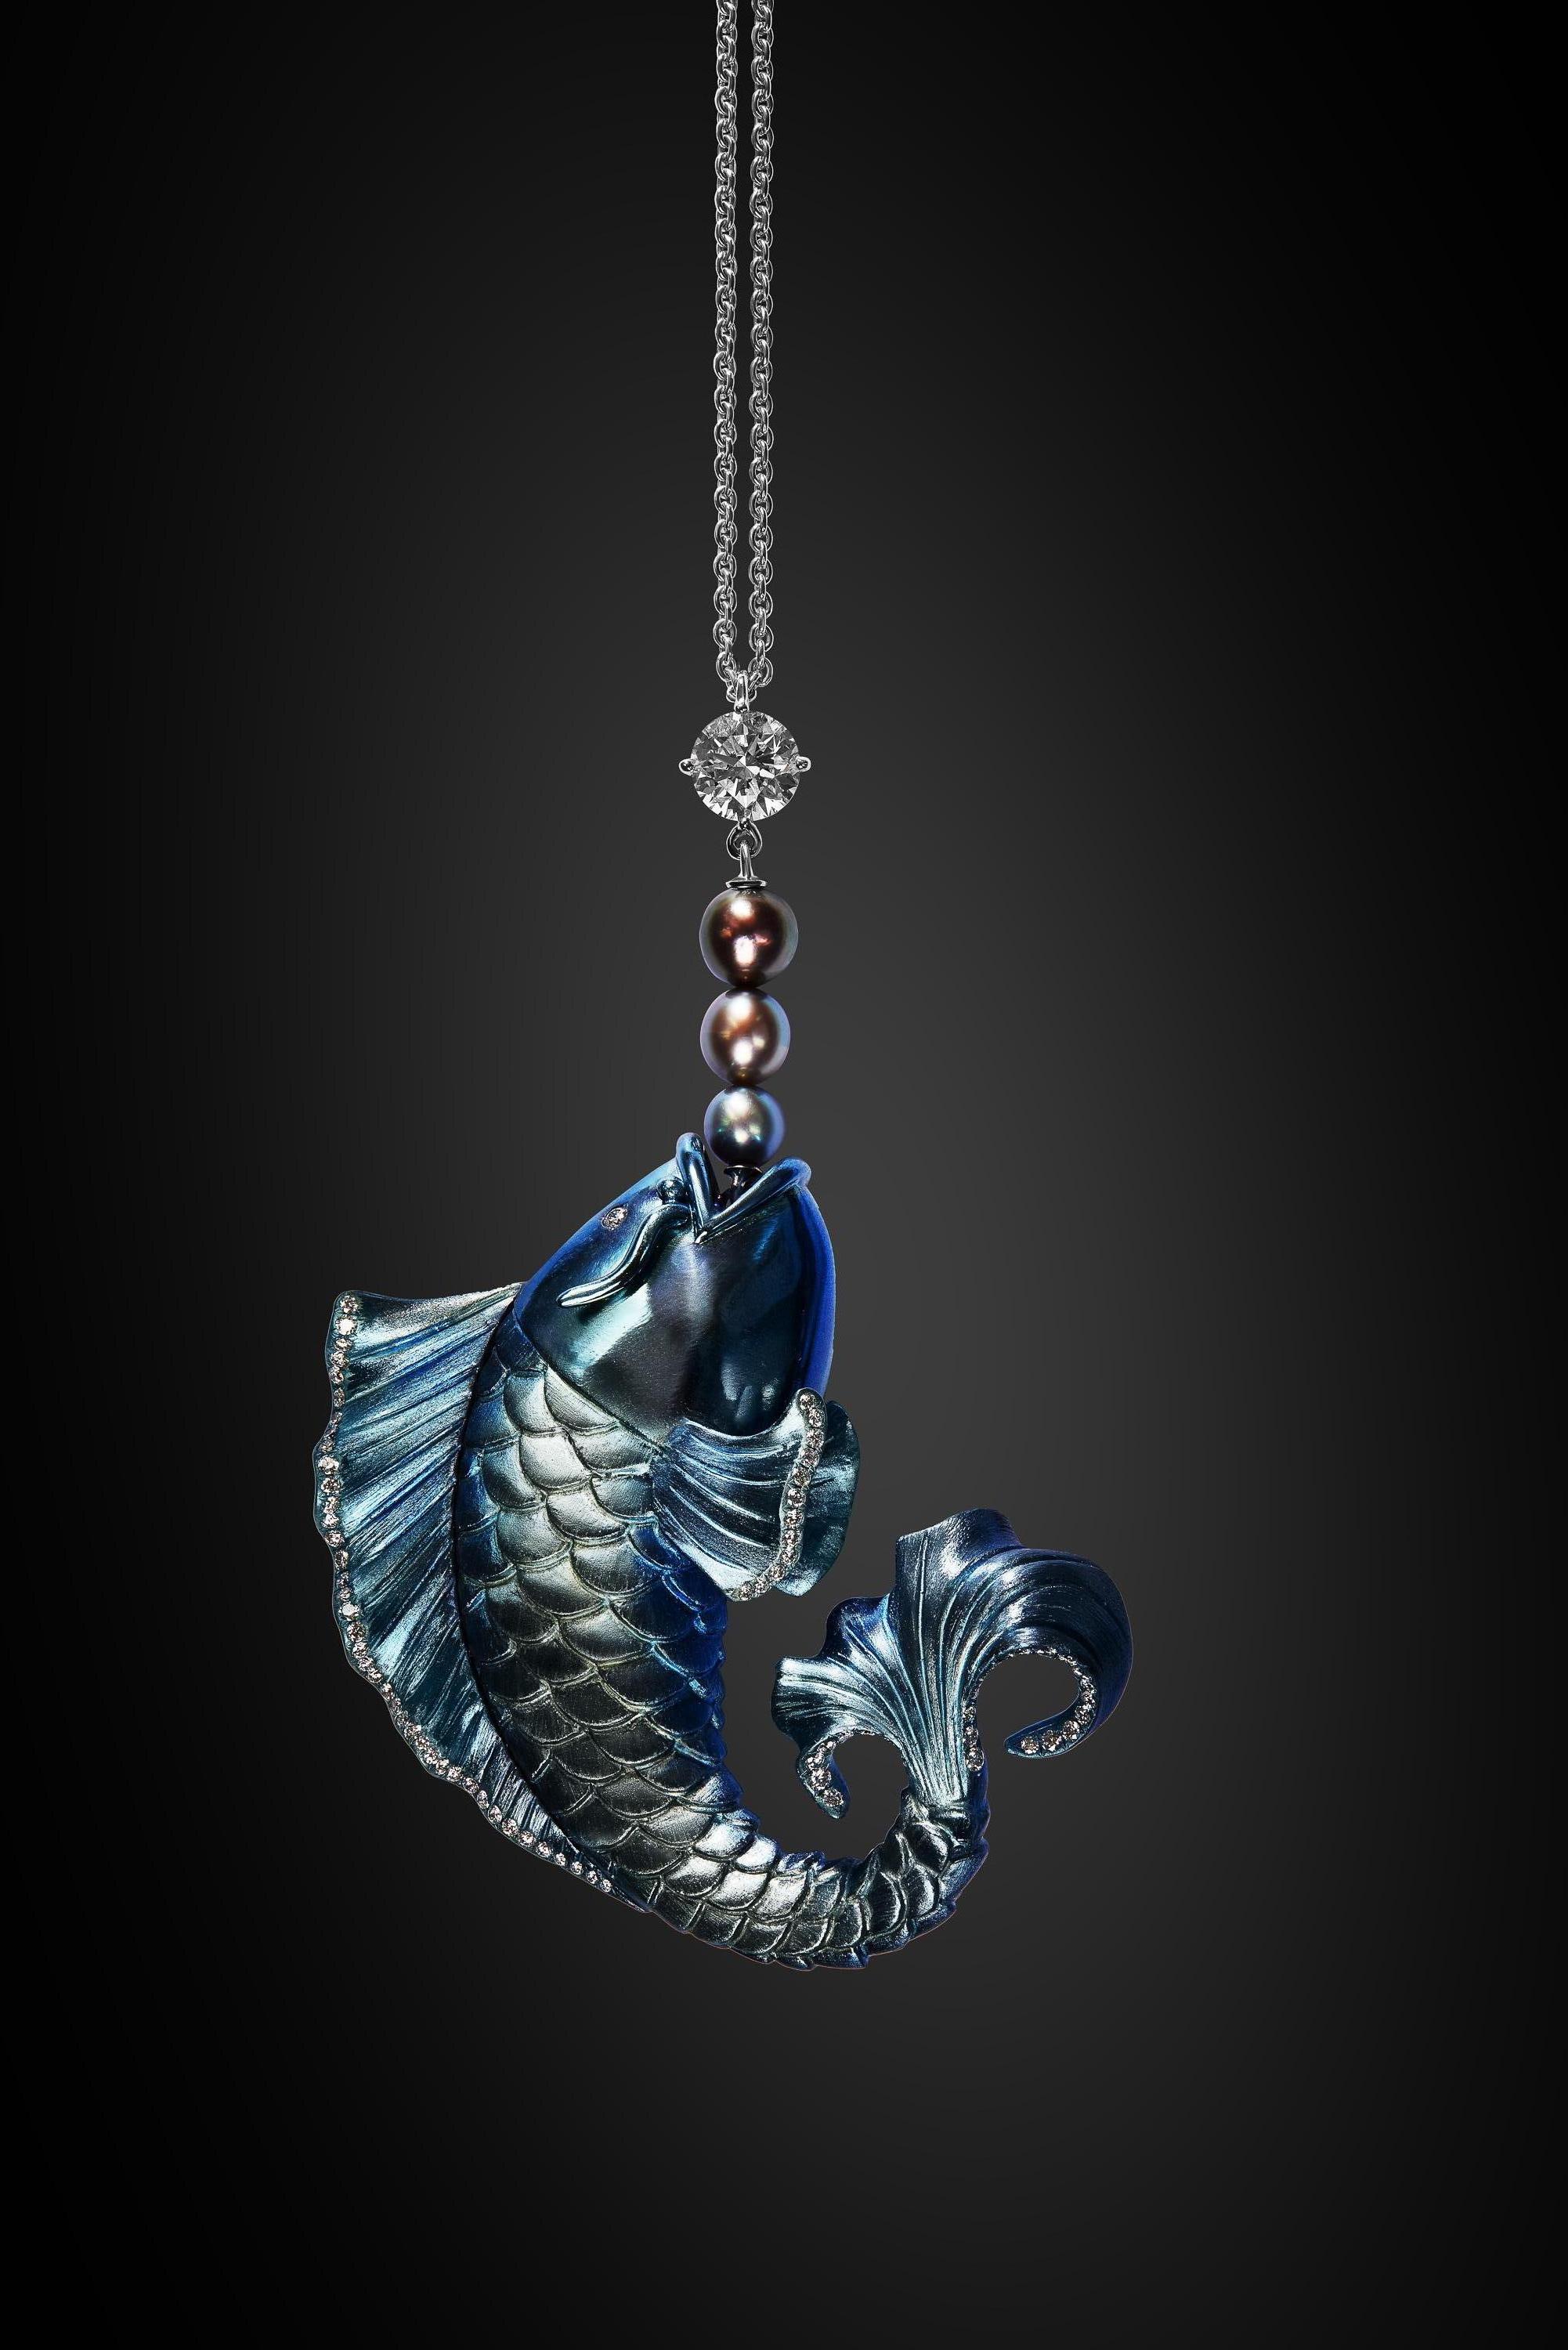 Evoking an ancient Asian symbol of courage and success, this leaping carp seizes a marvelous diamond, enhanced with three grey natural pearls.
In China,  Longmen cliffs on the Yellow River are a very difficult to cross for the valiant carps leaping